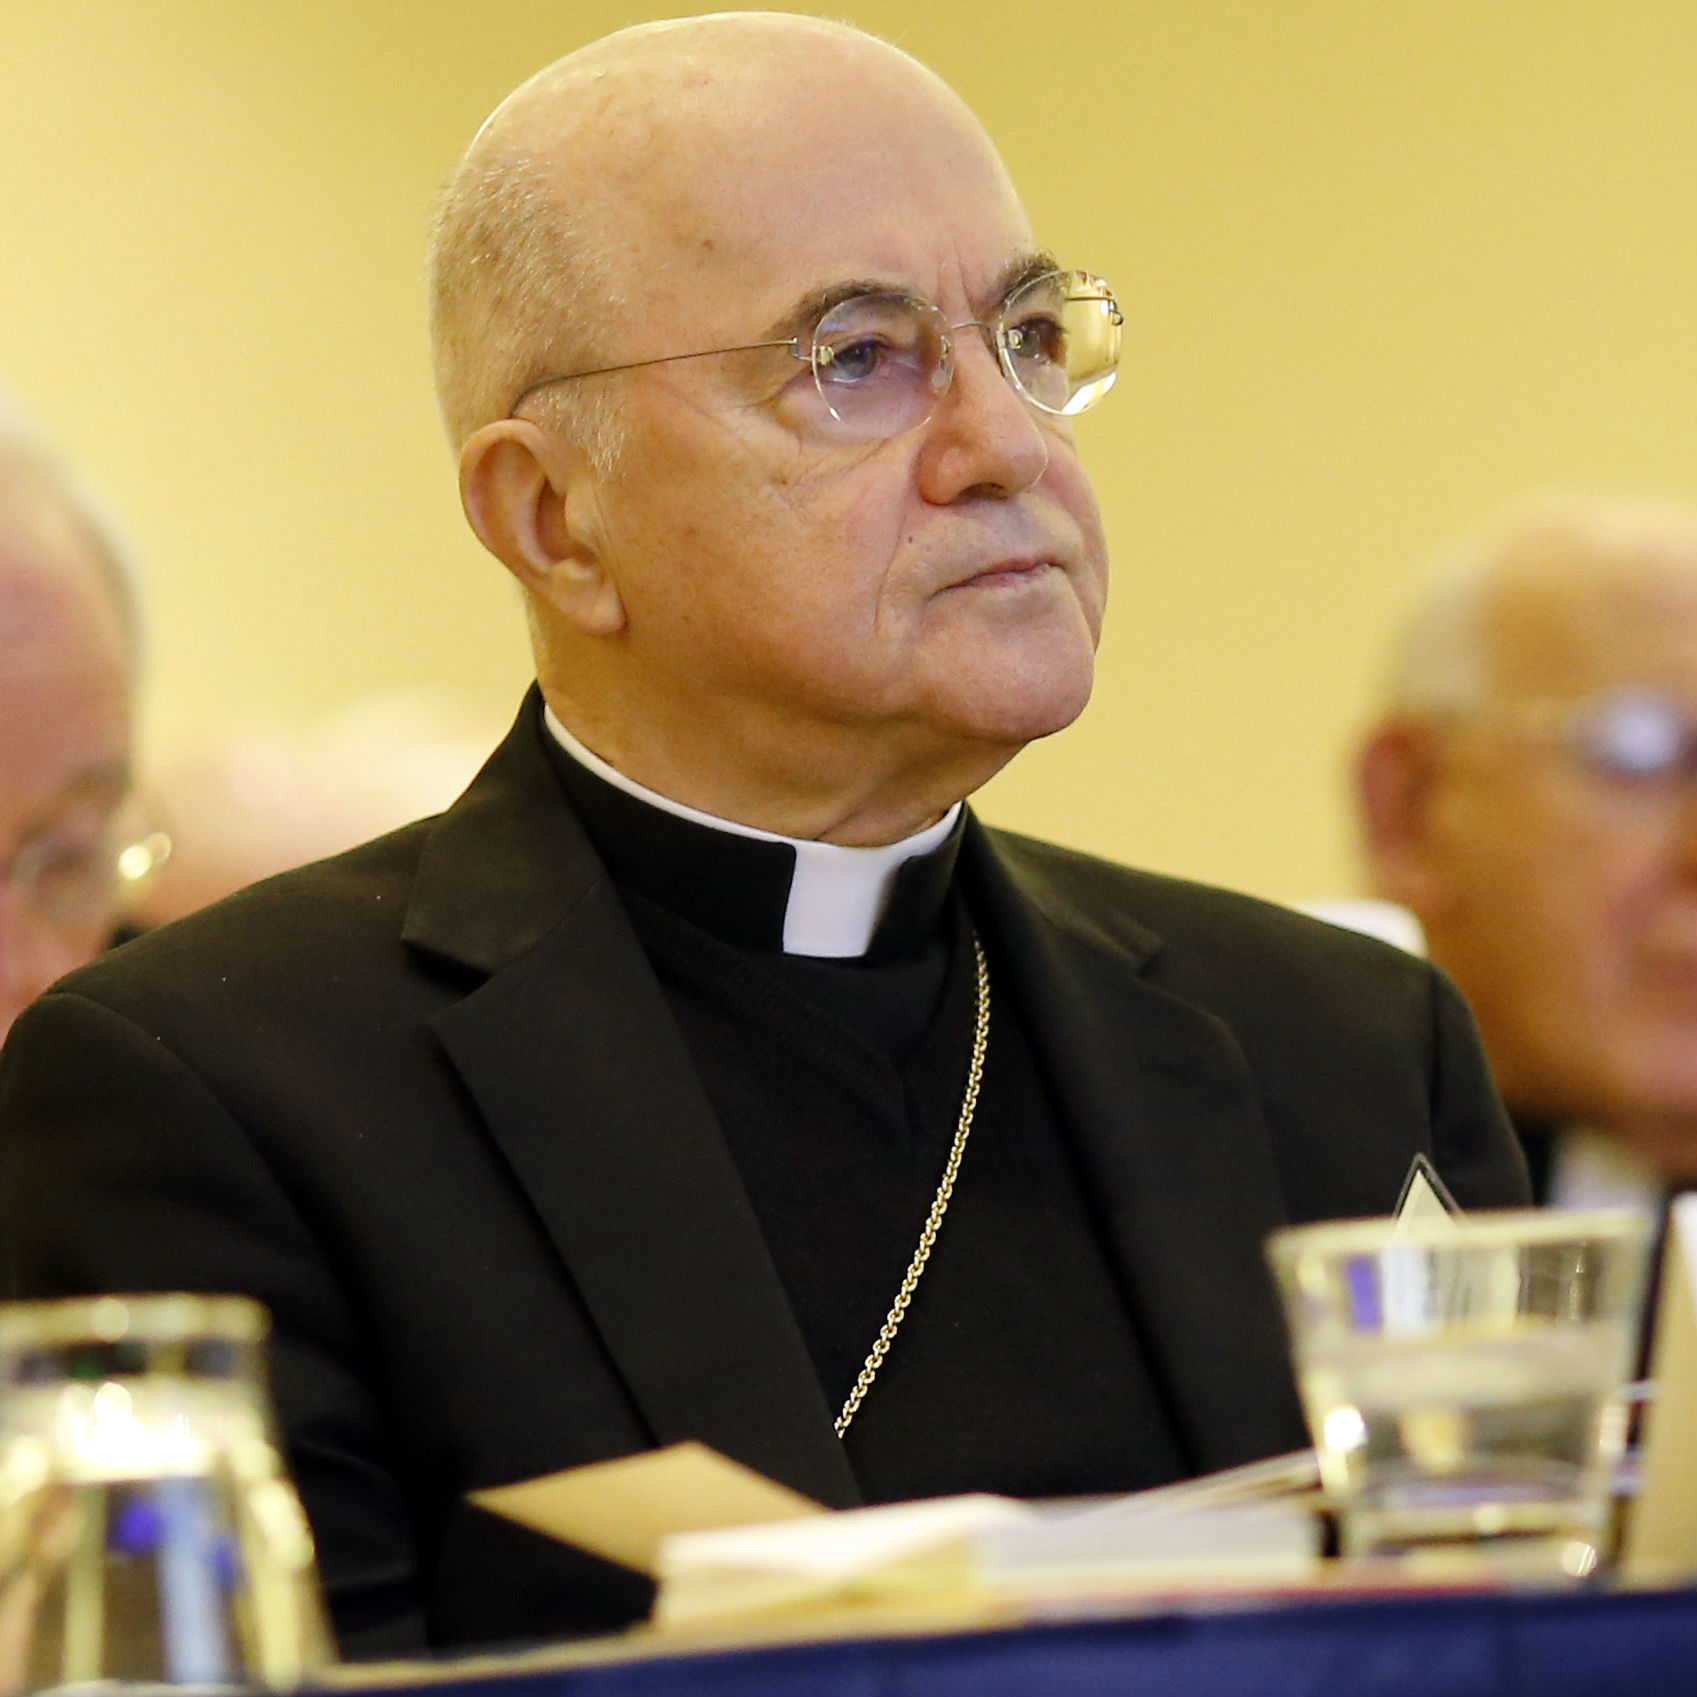 New book throws light on Viganò and McCarrick